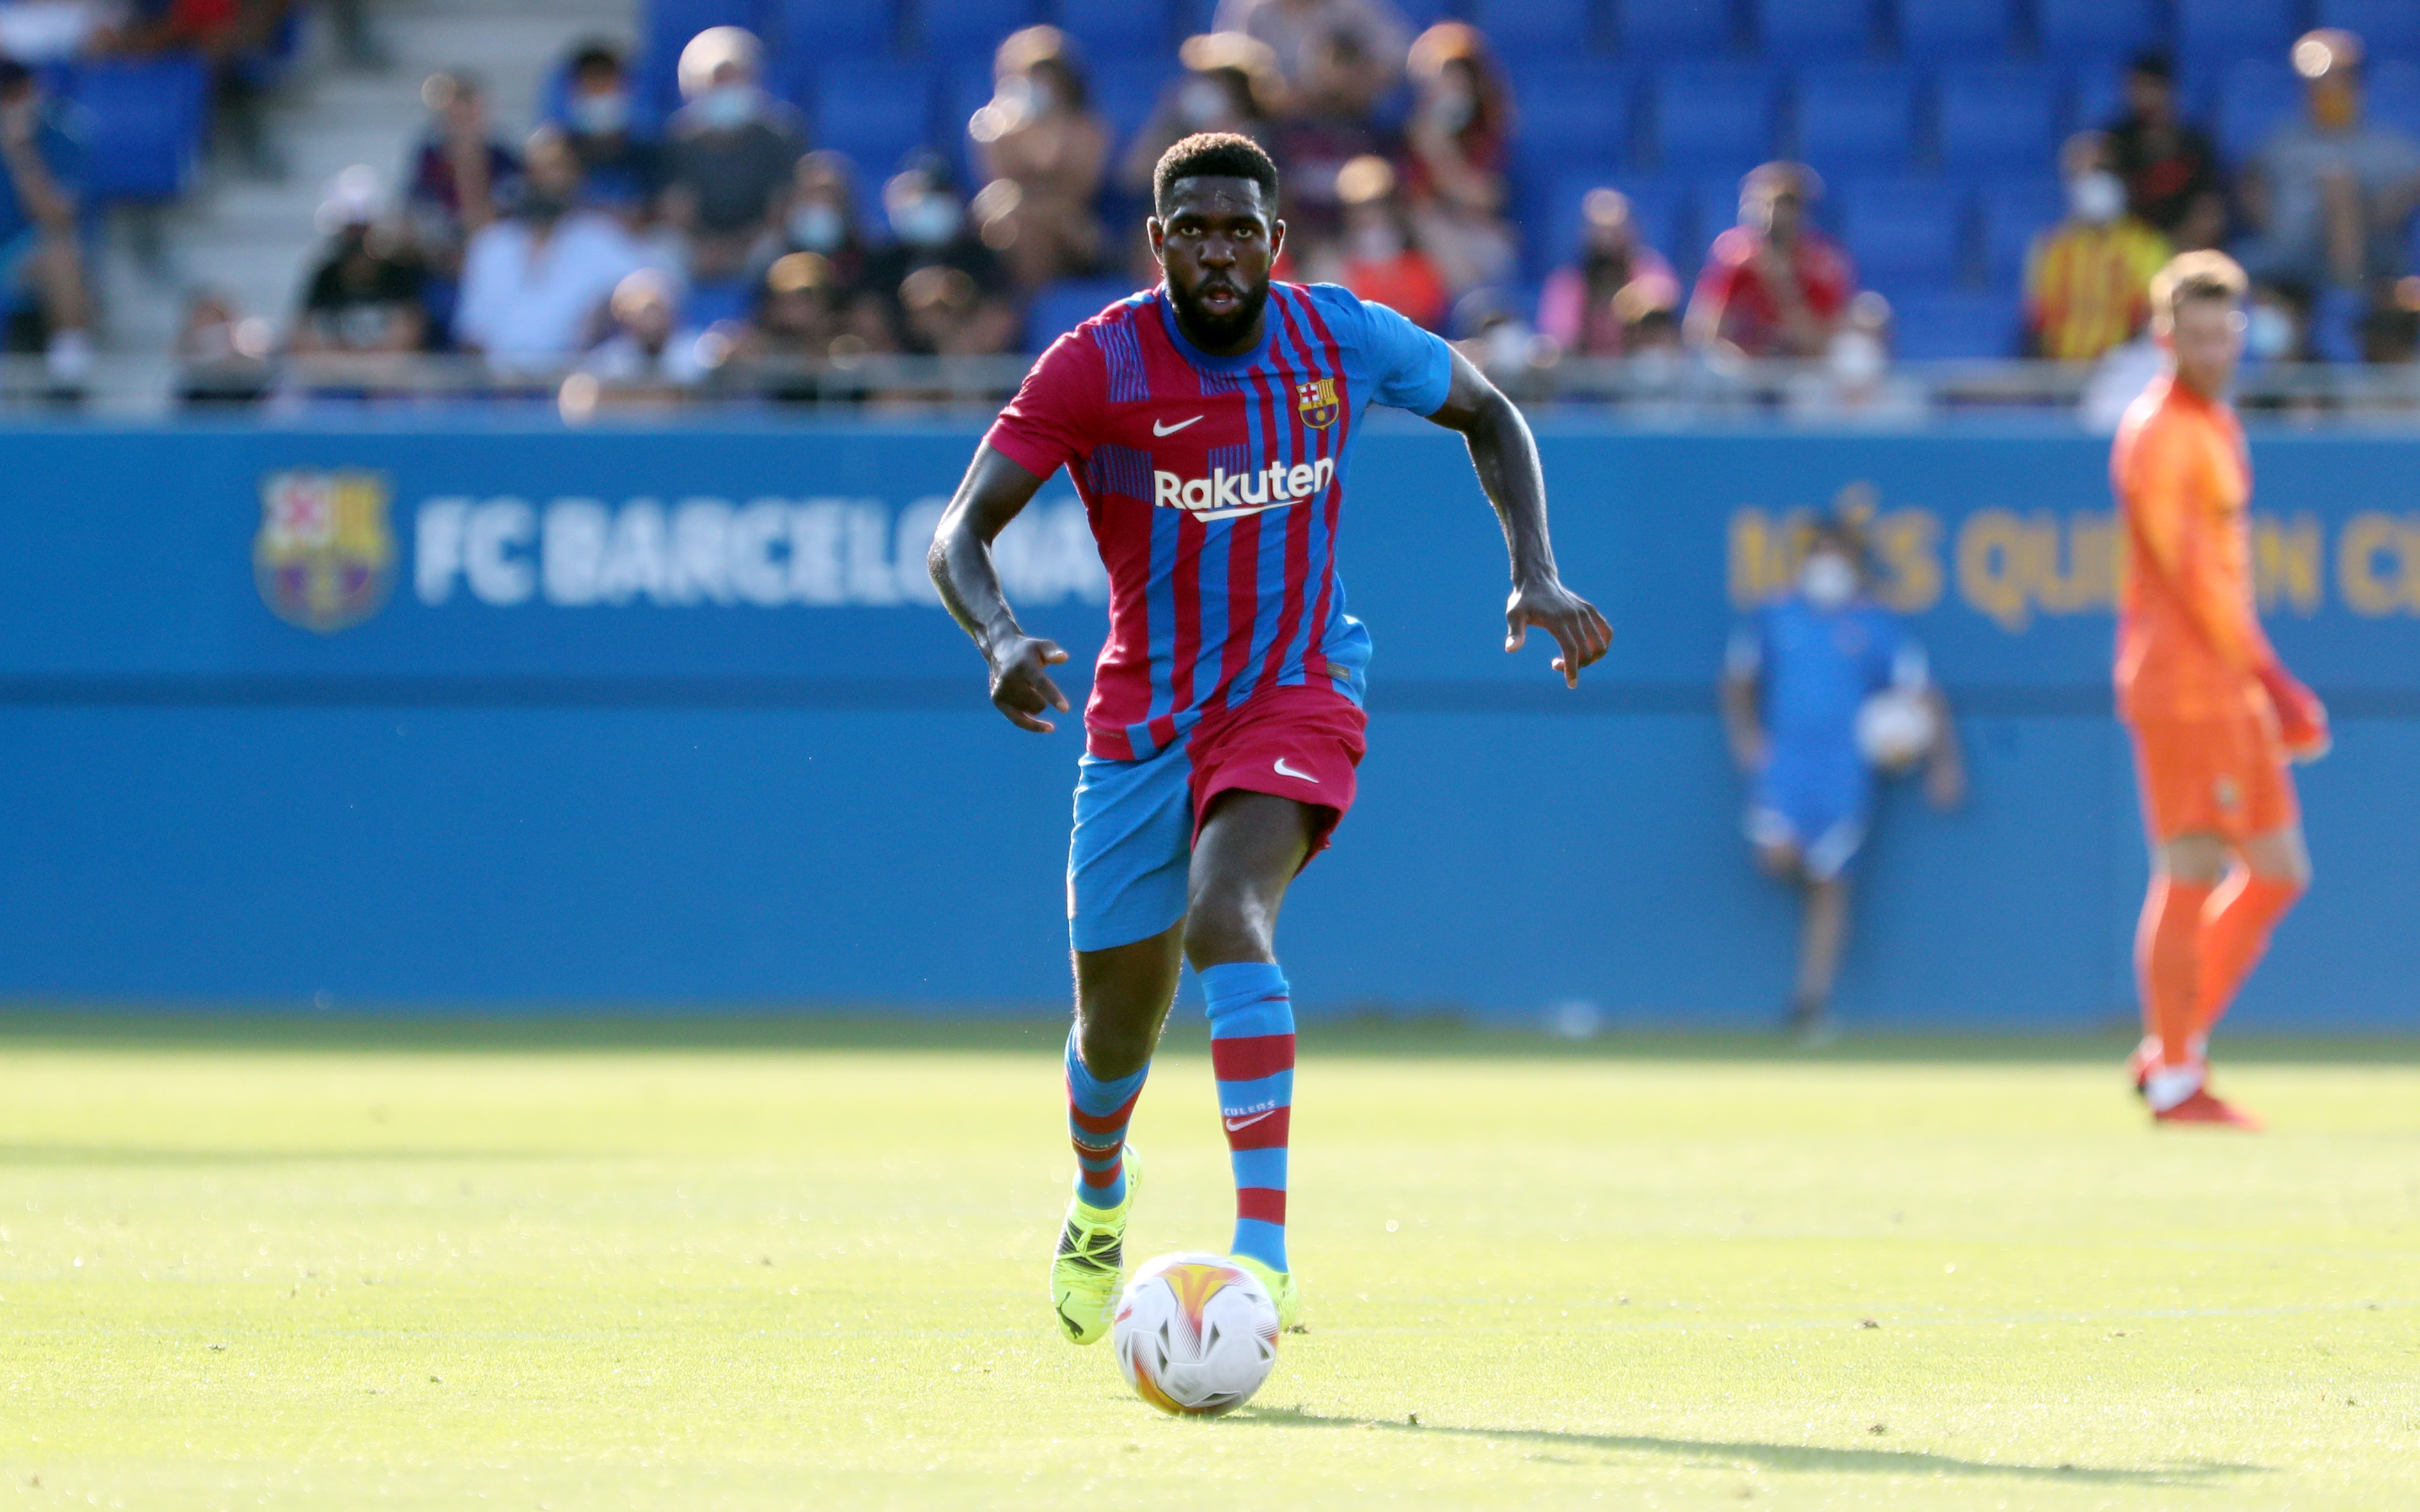 Samuel Umtiti contract extended to 2026 with reduction of part of his salary